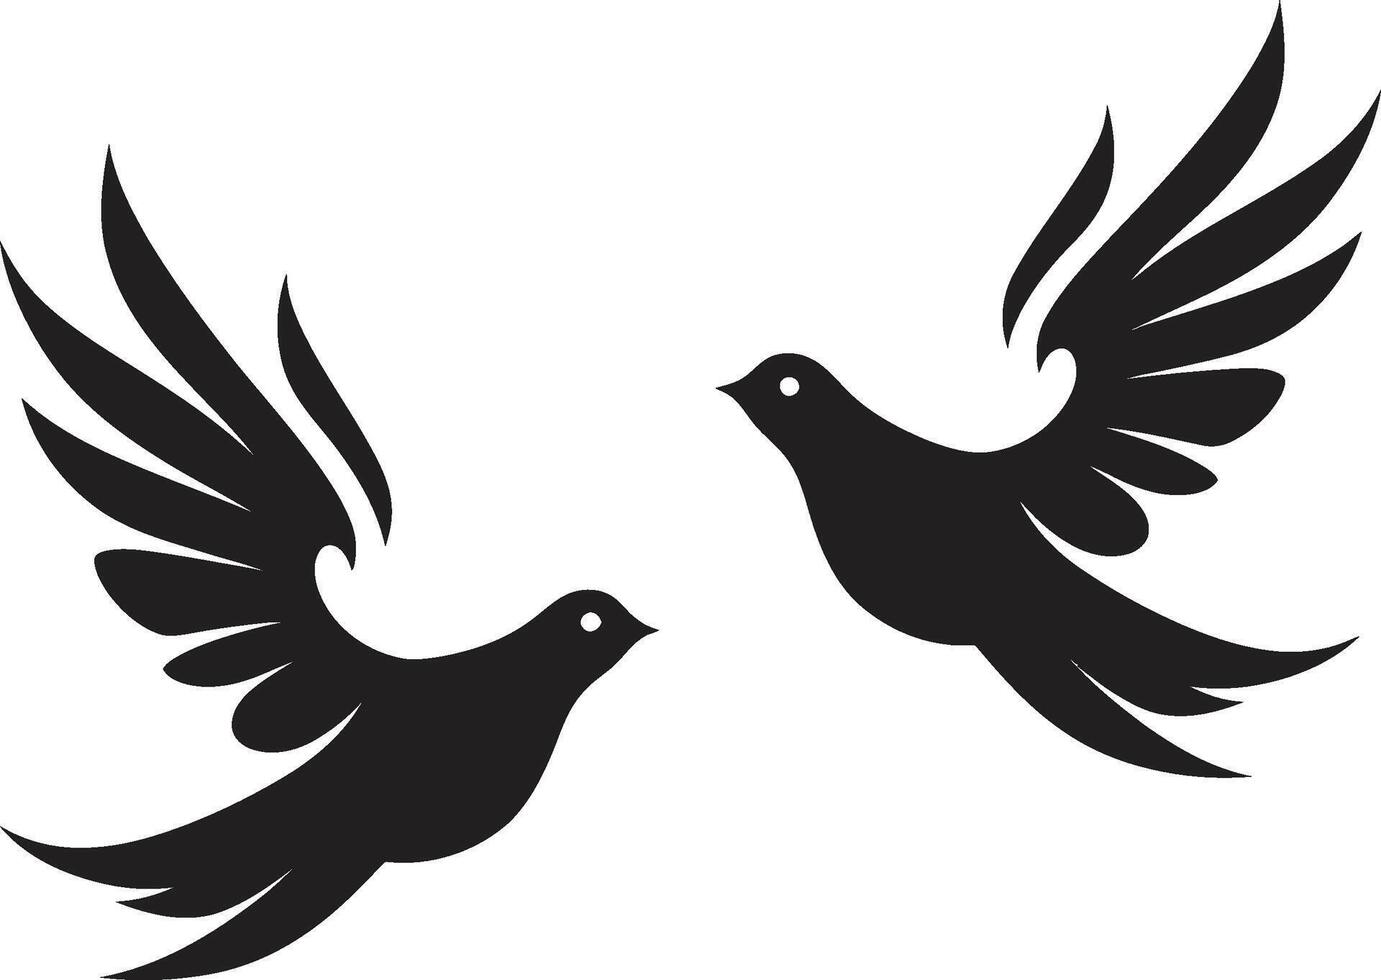 Soulful Soar of a Dove Pair Eternal Serenity Dove Pair Element vector